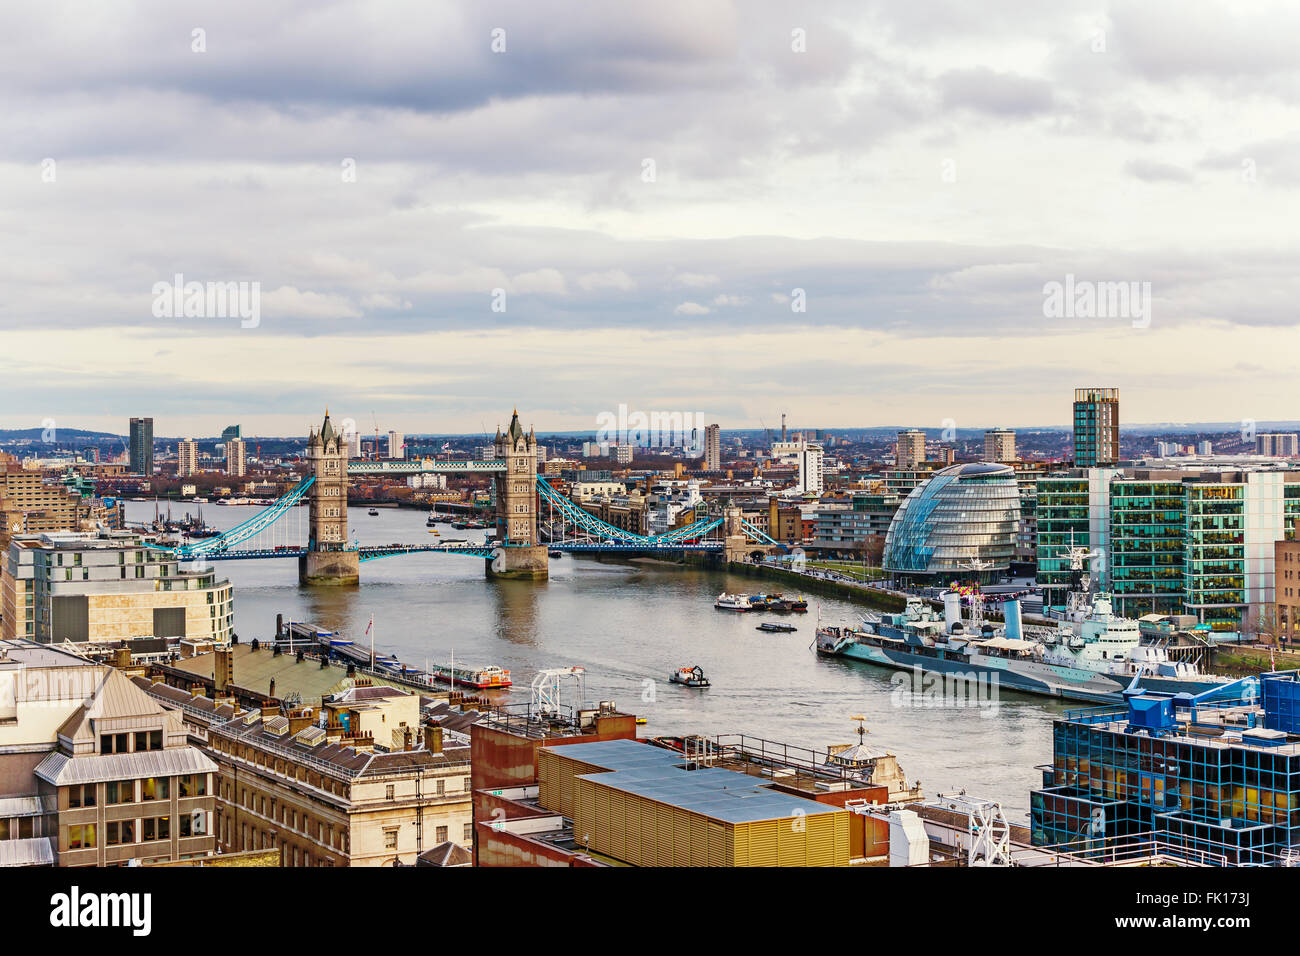 New Beautiful Urban View of London, England with Tower Bridge, City Hall and Thames River Stock Photo